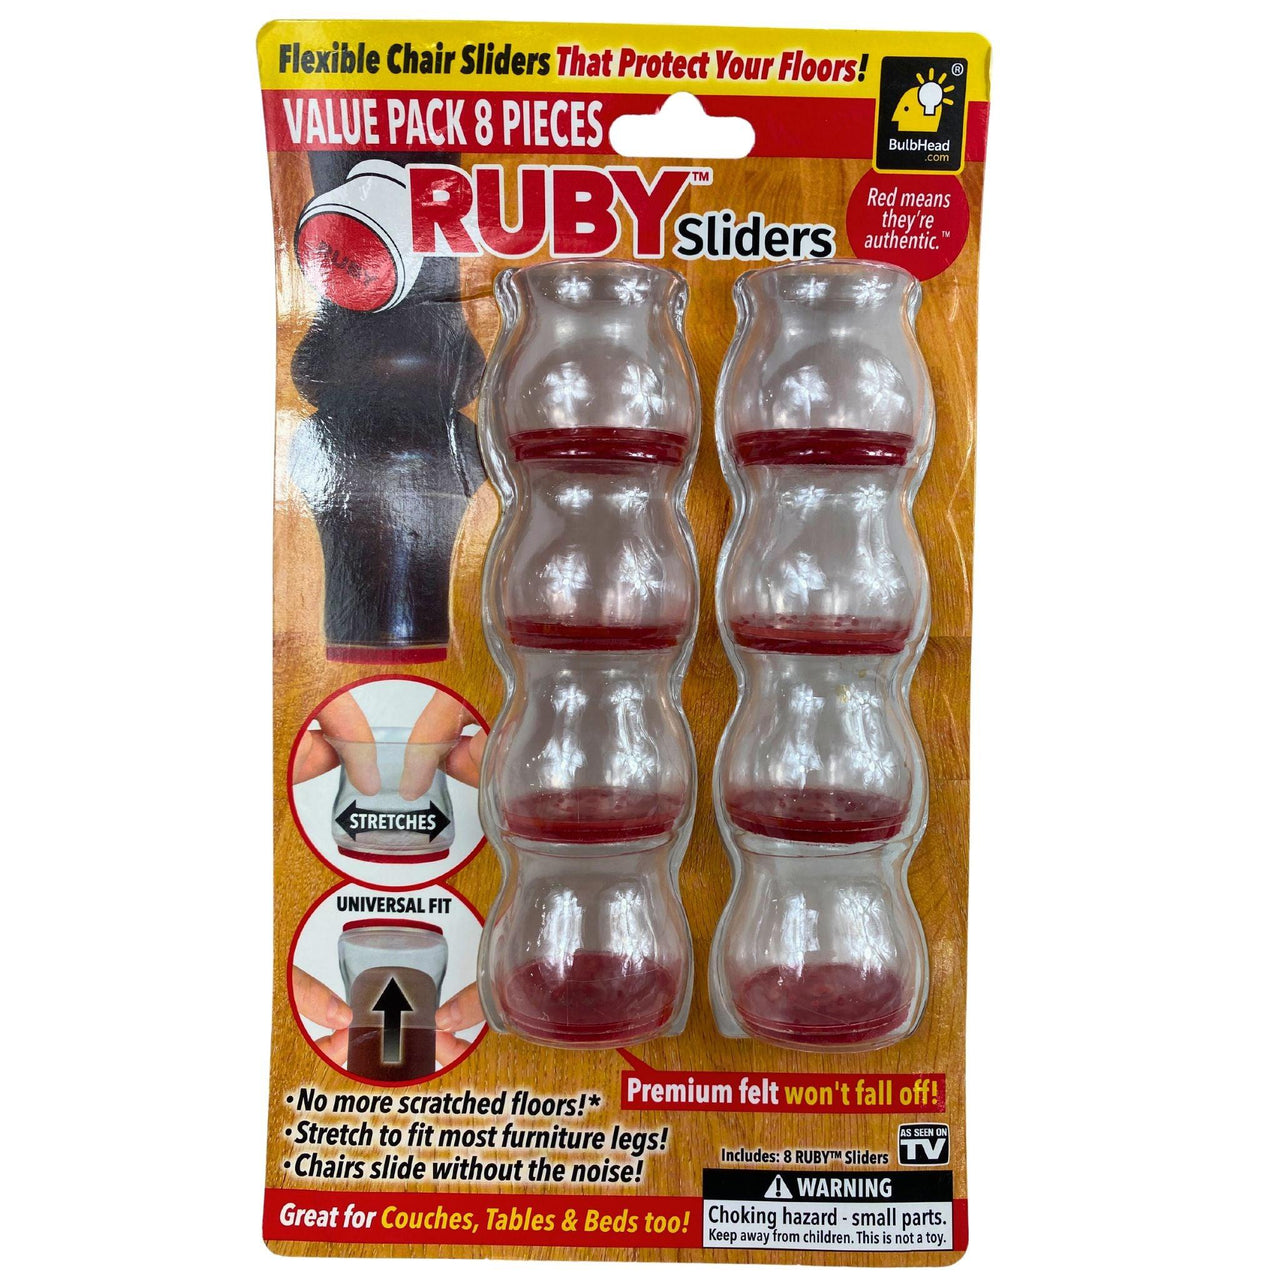 Ruby Sliders Flexible Chair Sliders That Protect Your Floors! (60 Pcs Lot) - Discount Wholesalers Inc